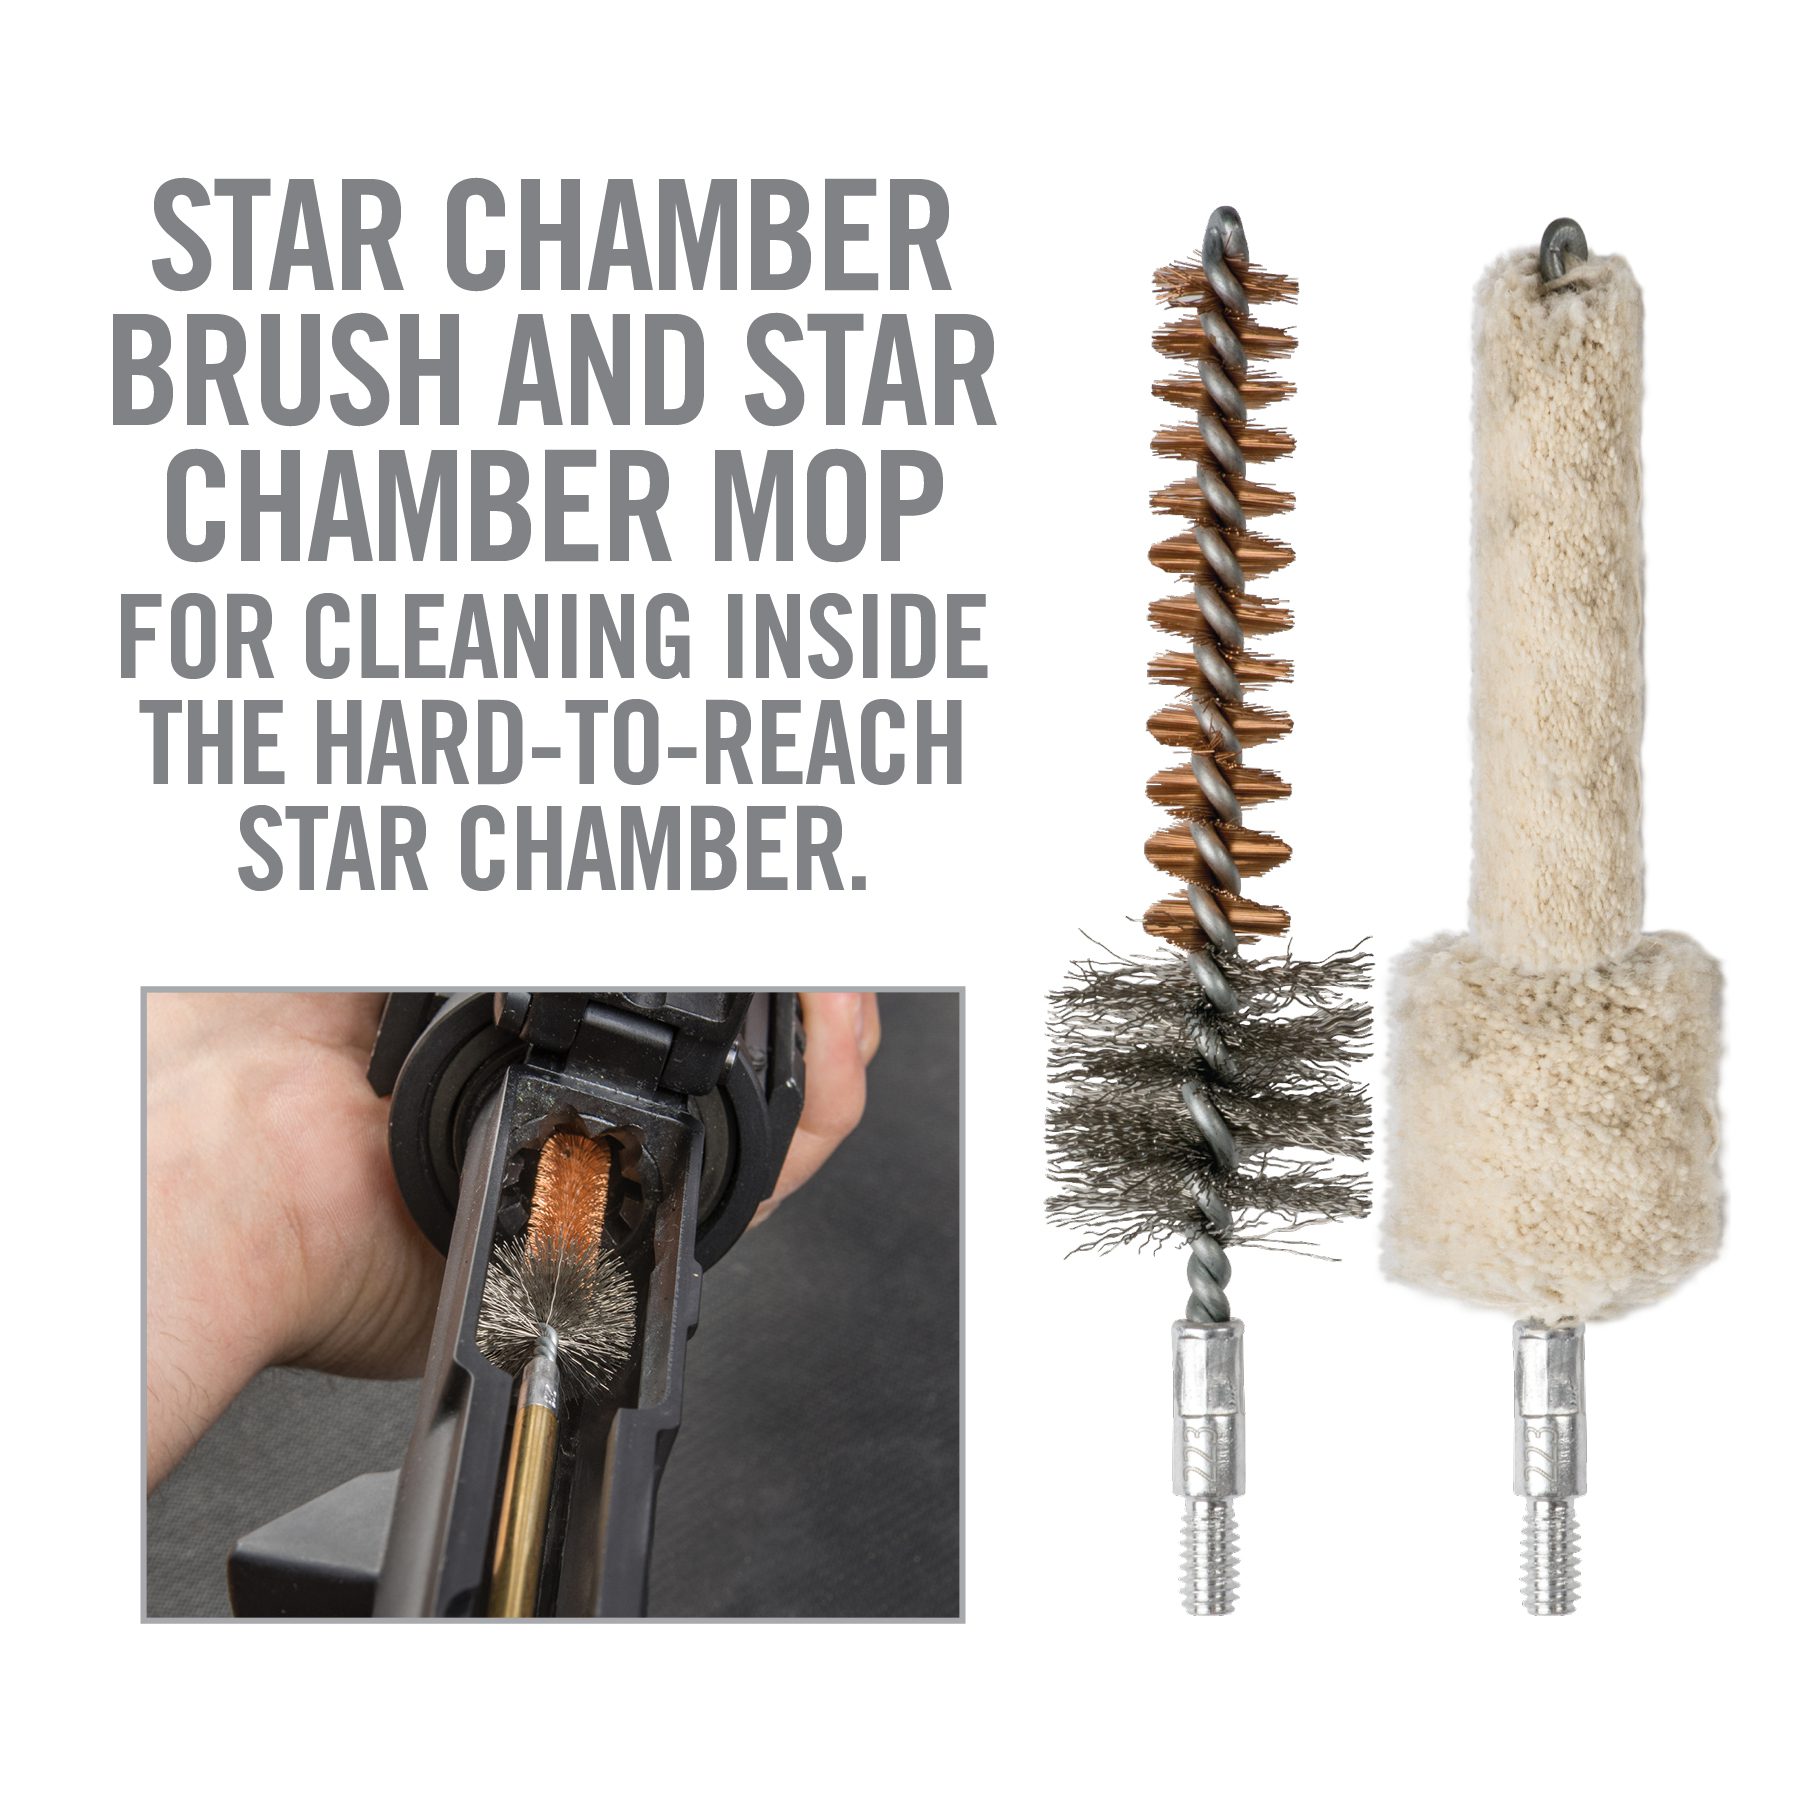 the star chamber brush and star chamber cleaner mop for cleaning inside the hard - to - reach star